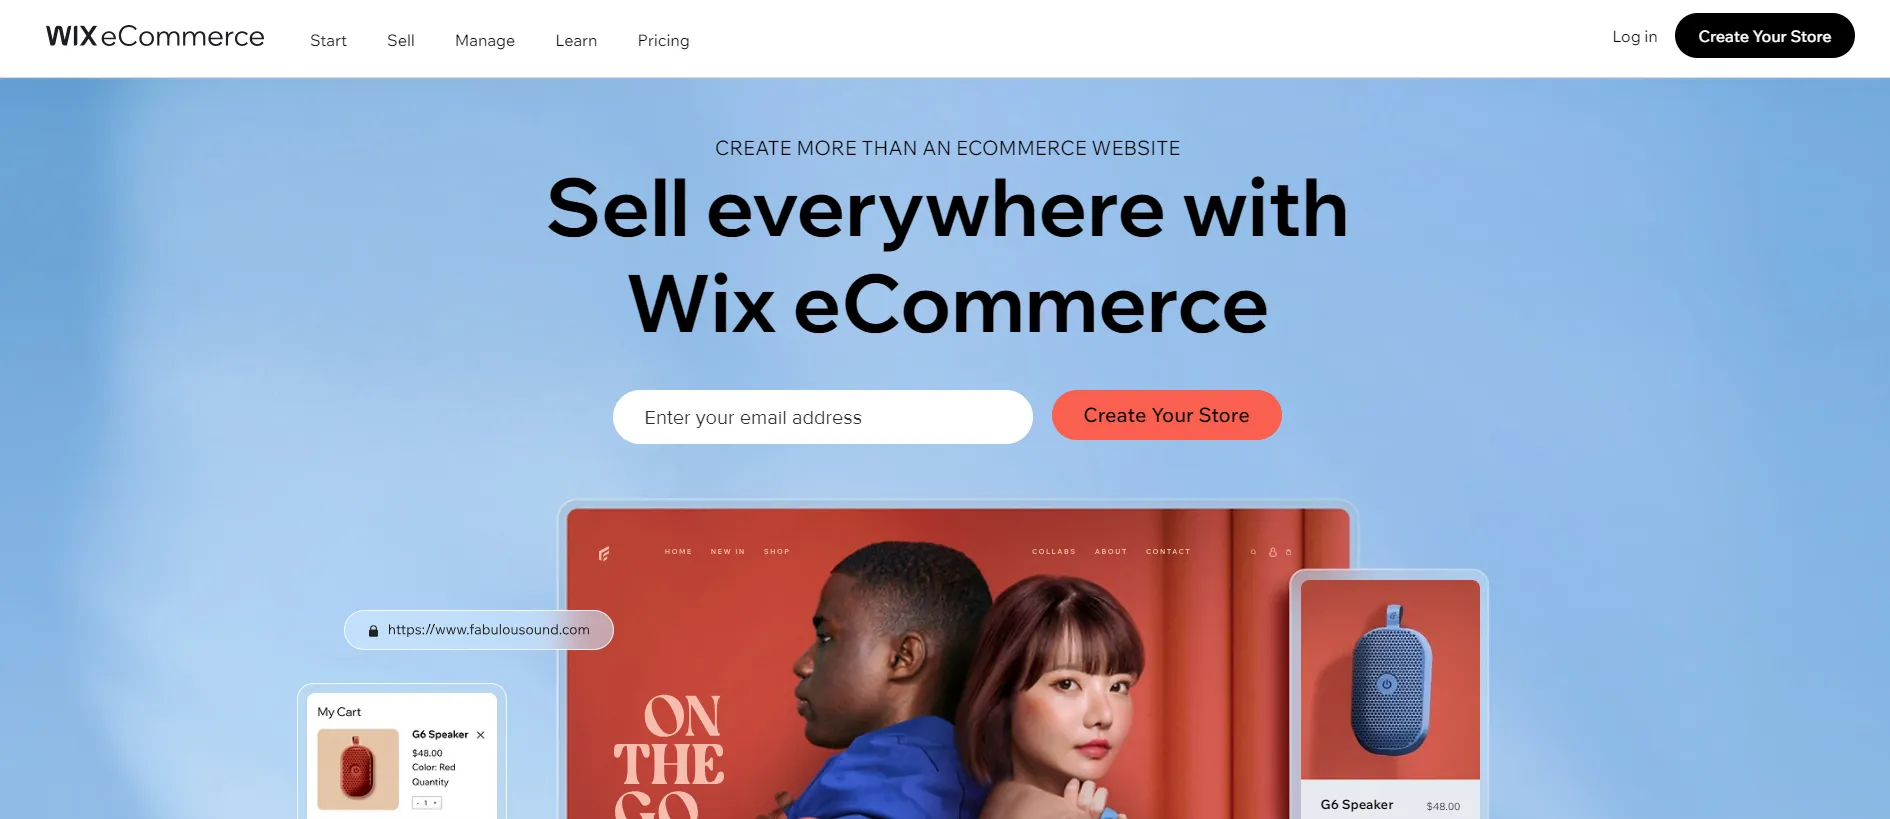 Wix eCommerce features